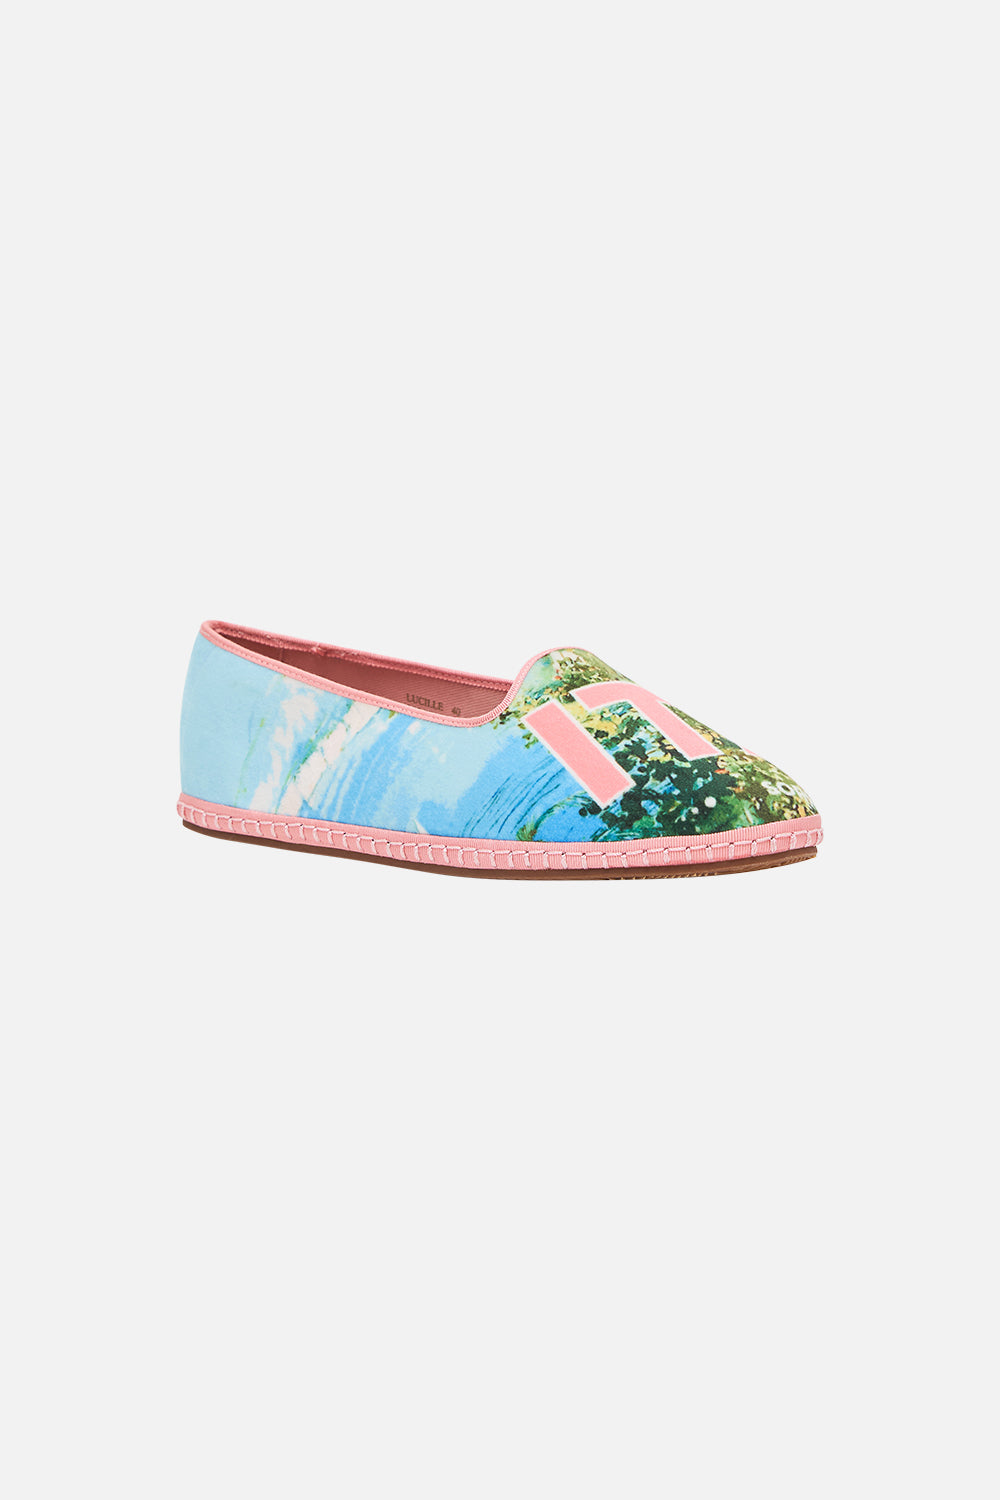 Product view of CAMILLA designer espadrille shoes in From Sorrento With Love print